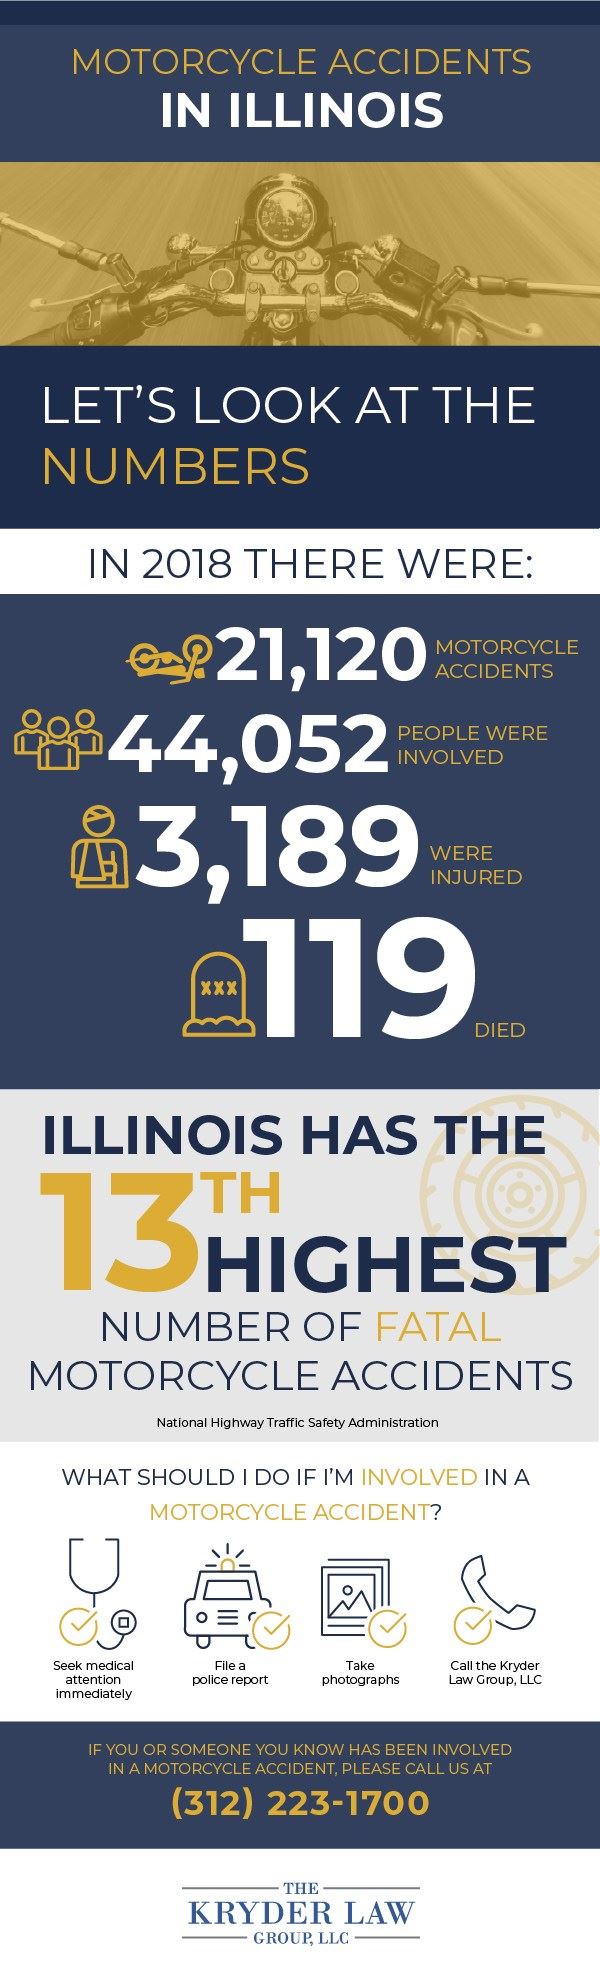 Illinois Motorcycle Accidents Infographic 1